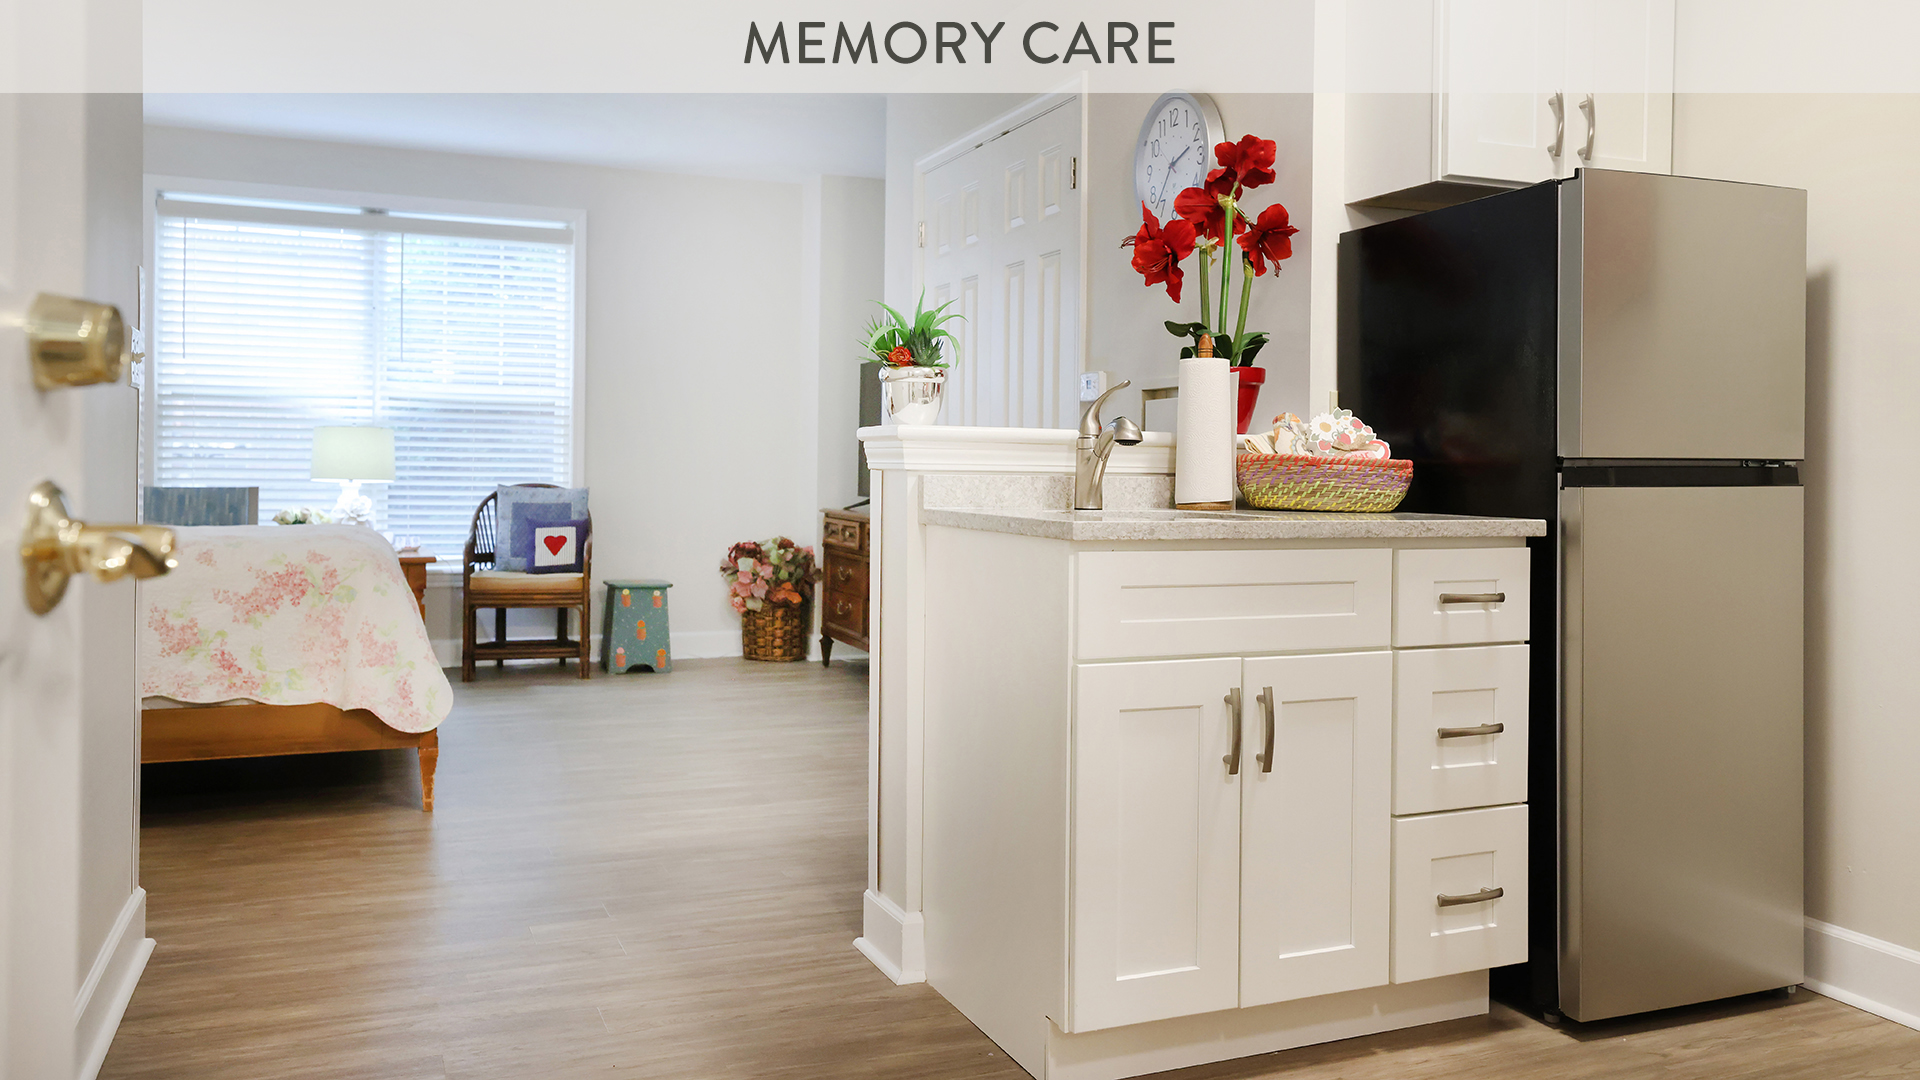 memory care studio with kitchenette and queen sized bed